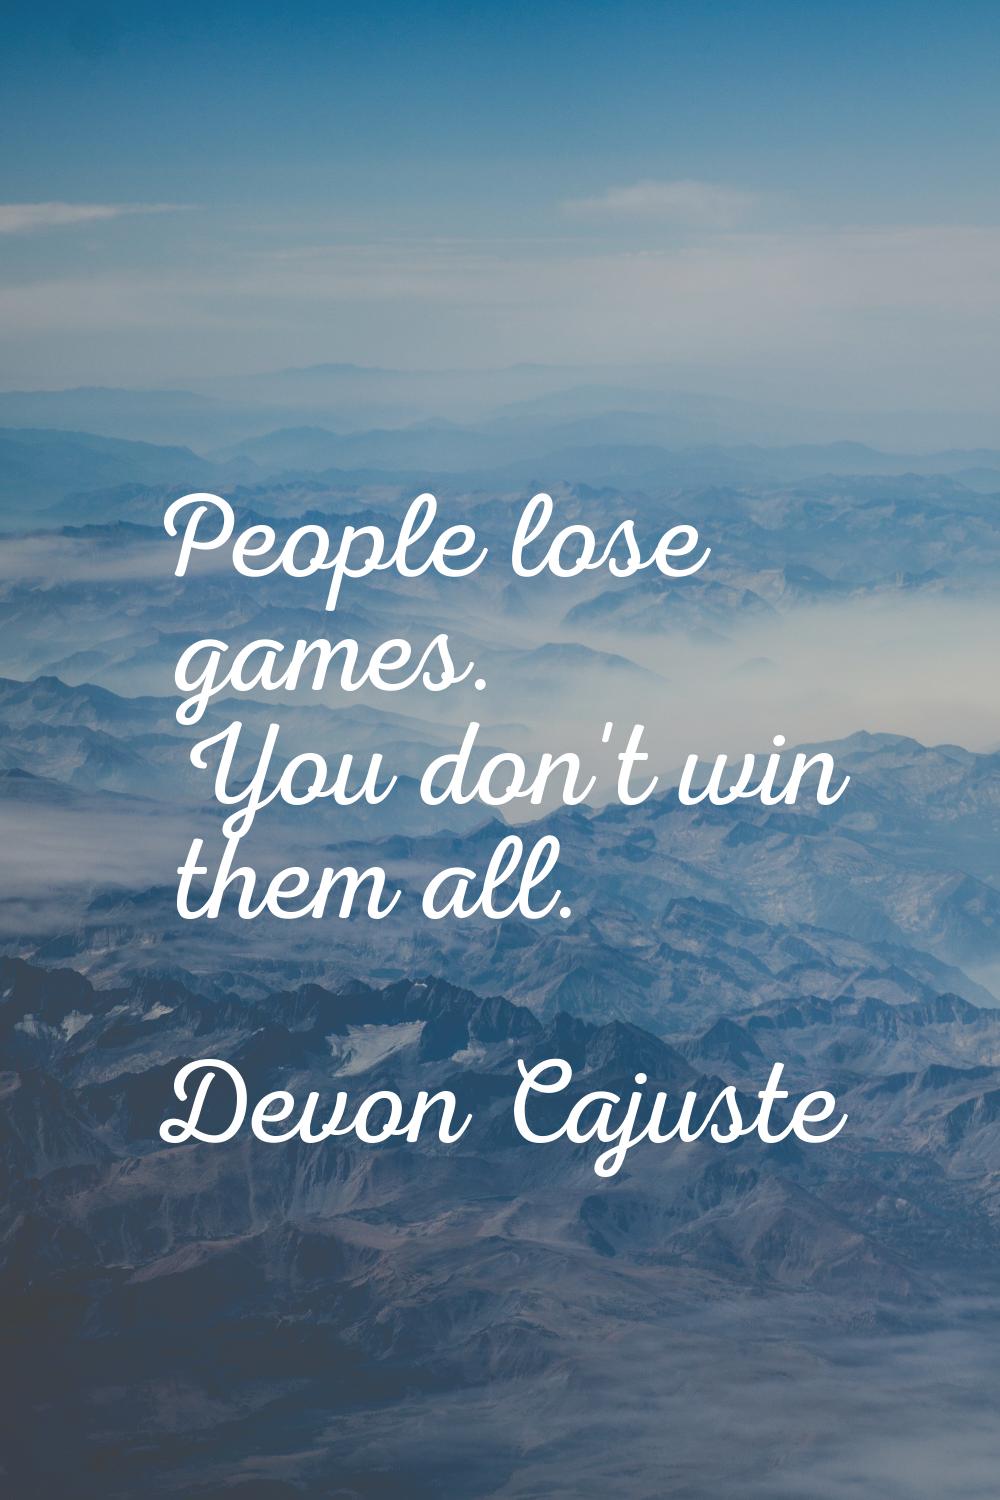 People lose games. You don't win them all.